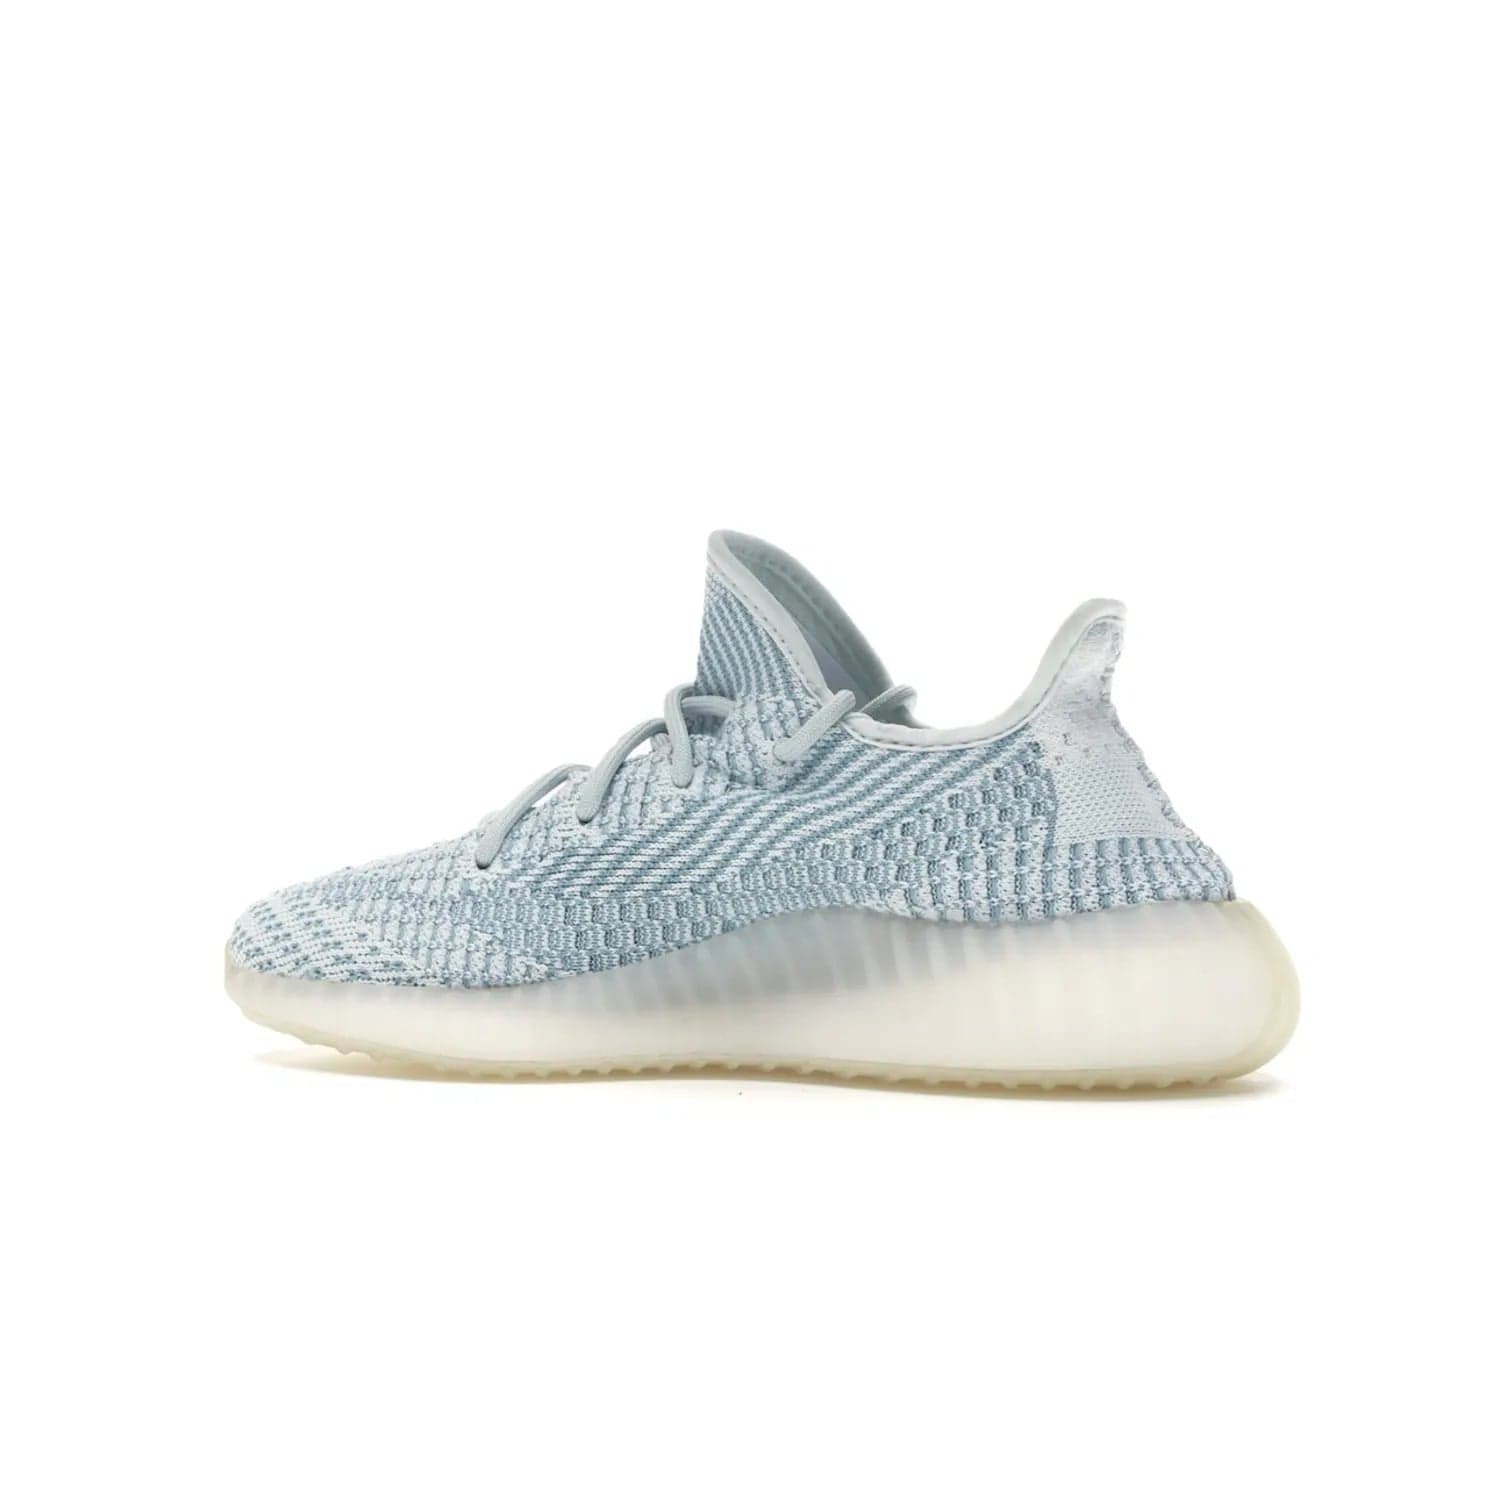 adidas Yeezy Boost 350 V2 Cloud White (Non-Reflective) - Image 21 - Only at www.BallersClubKickz.com - Uniquely designed adidas Yeezy Boost 350 V2 Cloud White (Non-Reflective) with a Primeknit upper in shades of cream and blue with a contrasting hard sole. A fashion-forward sneaker with a transparent strip and blue-and-white patterns.